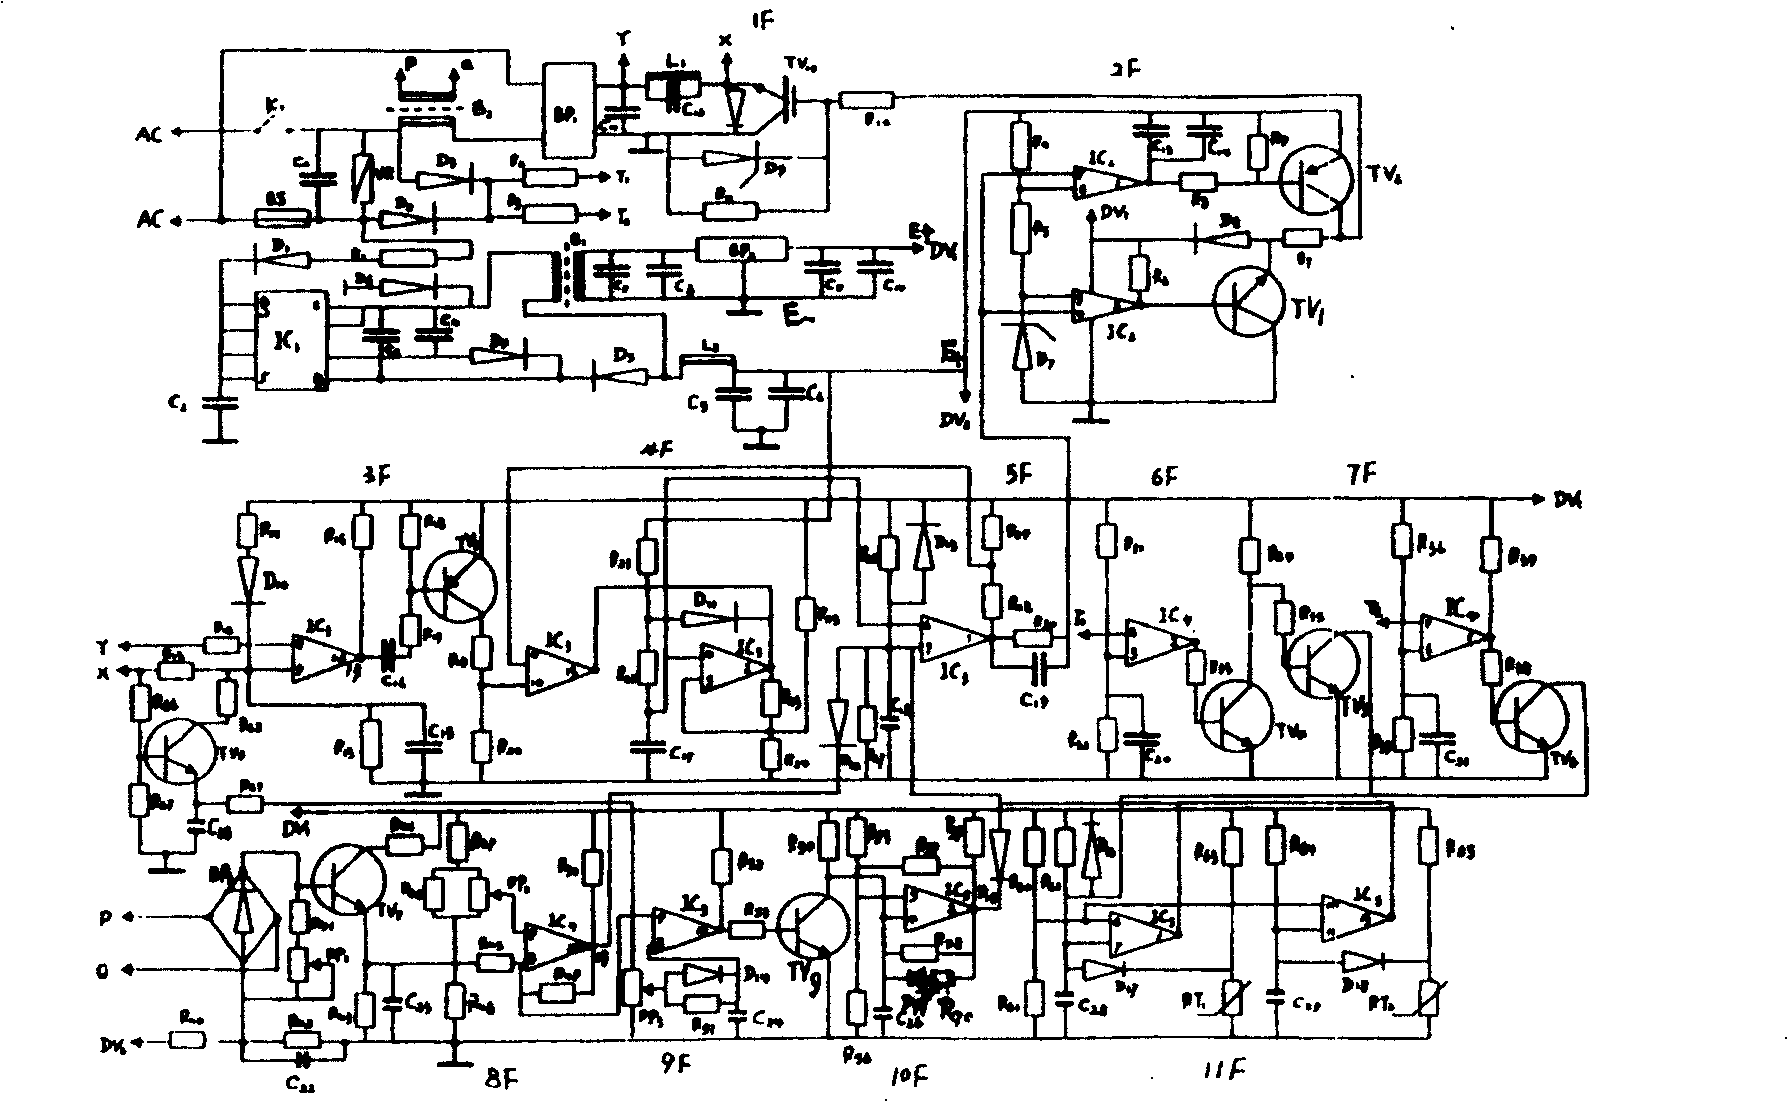 Electronic water heater